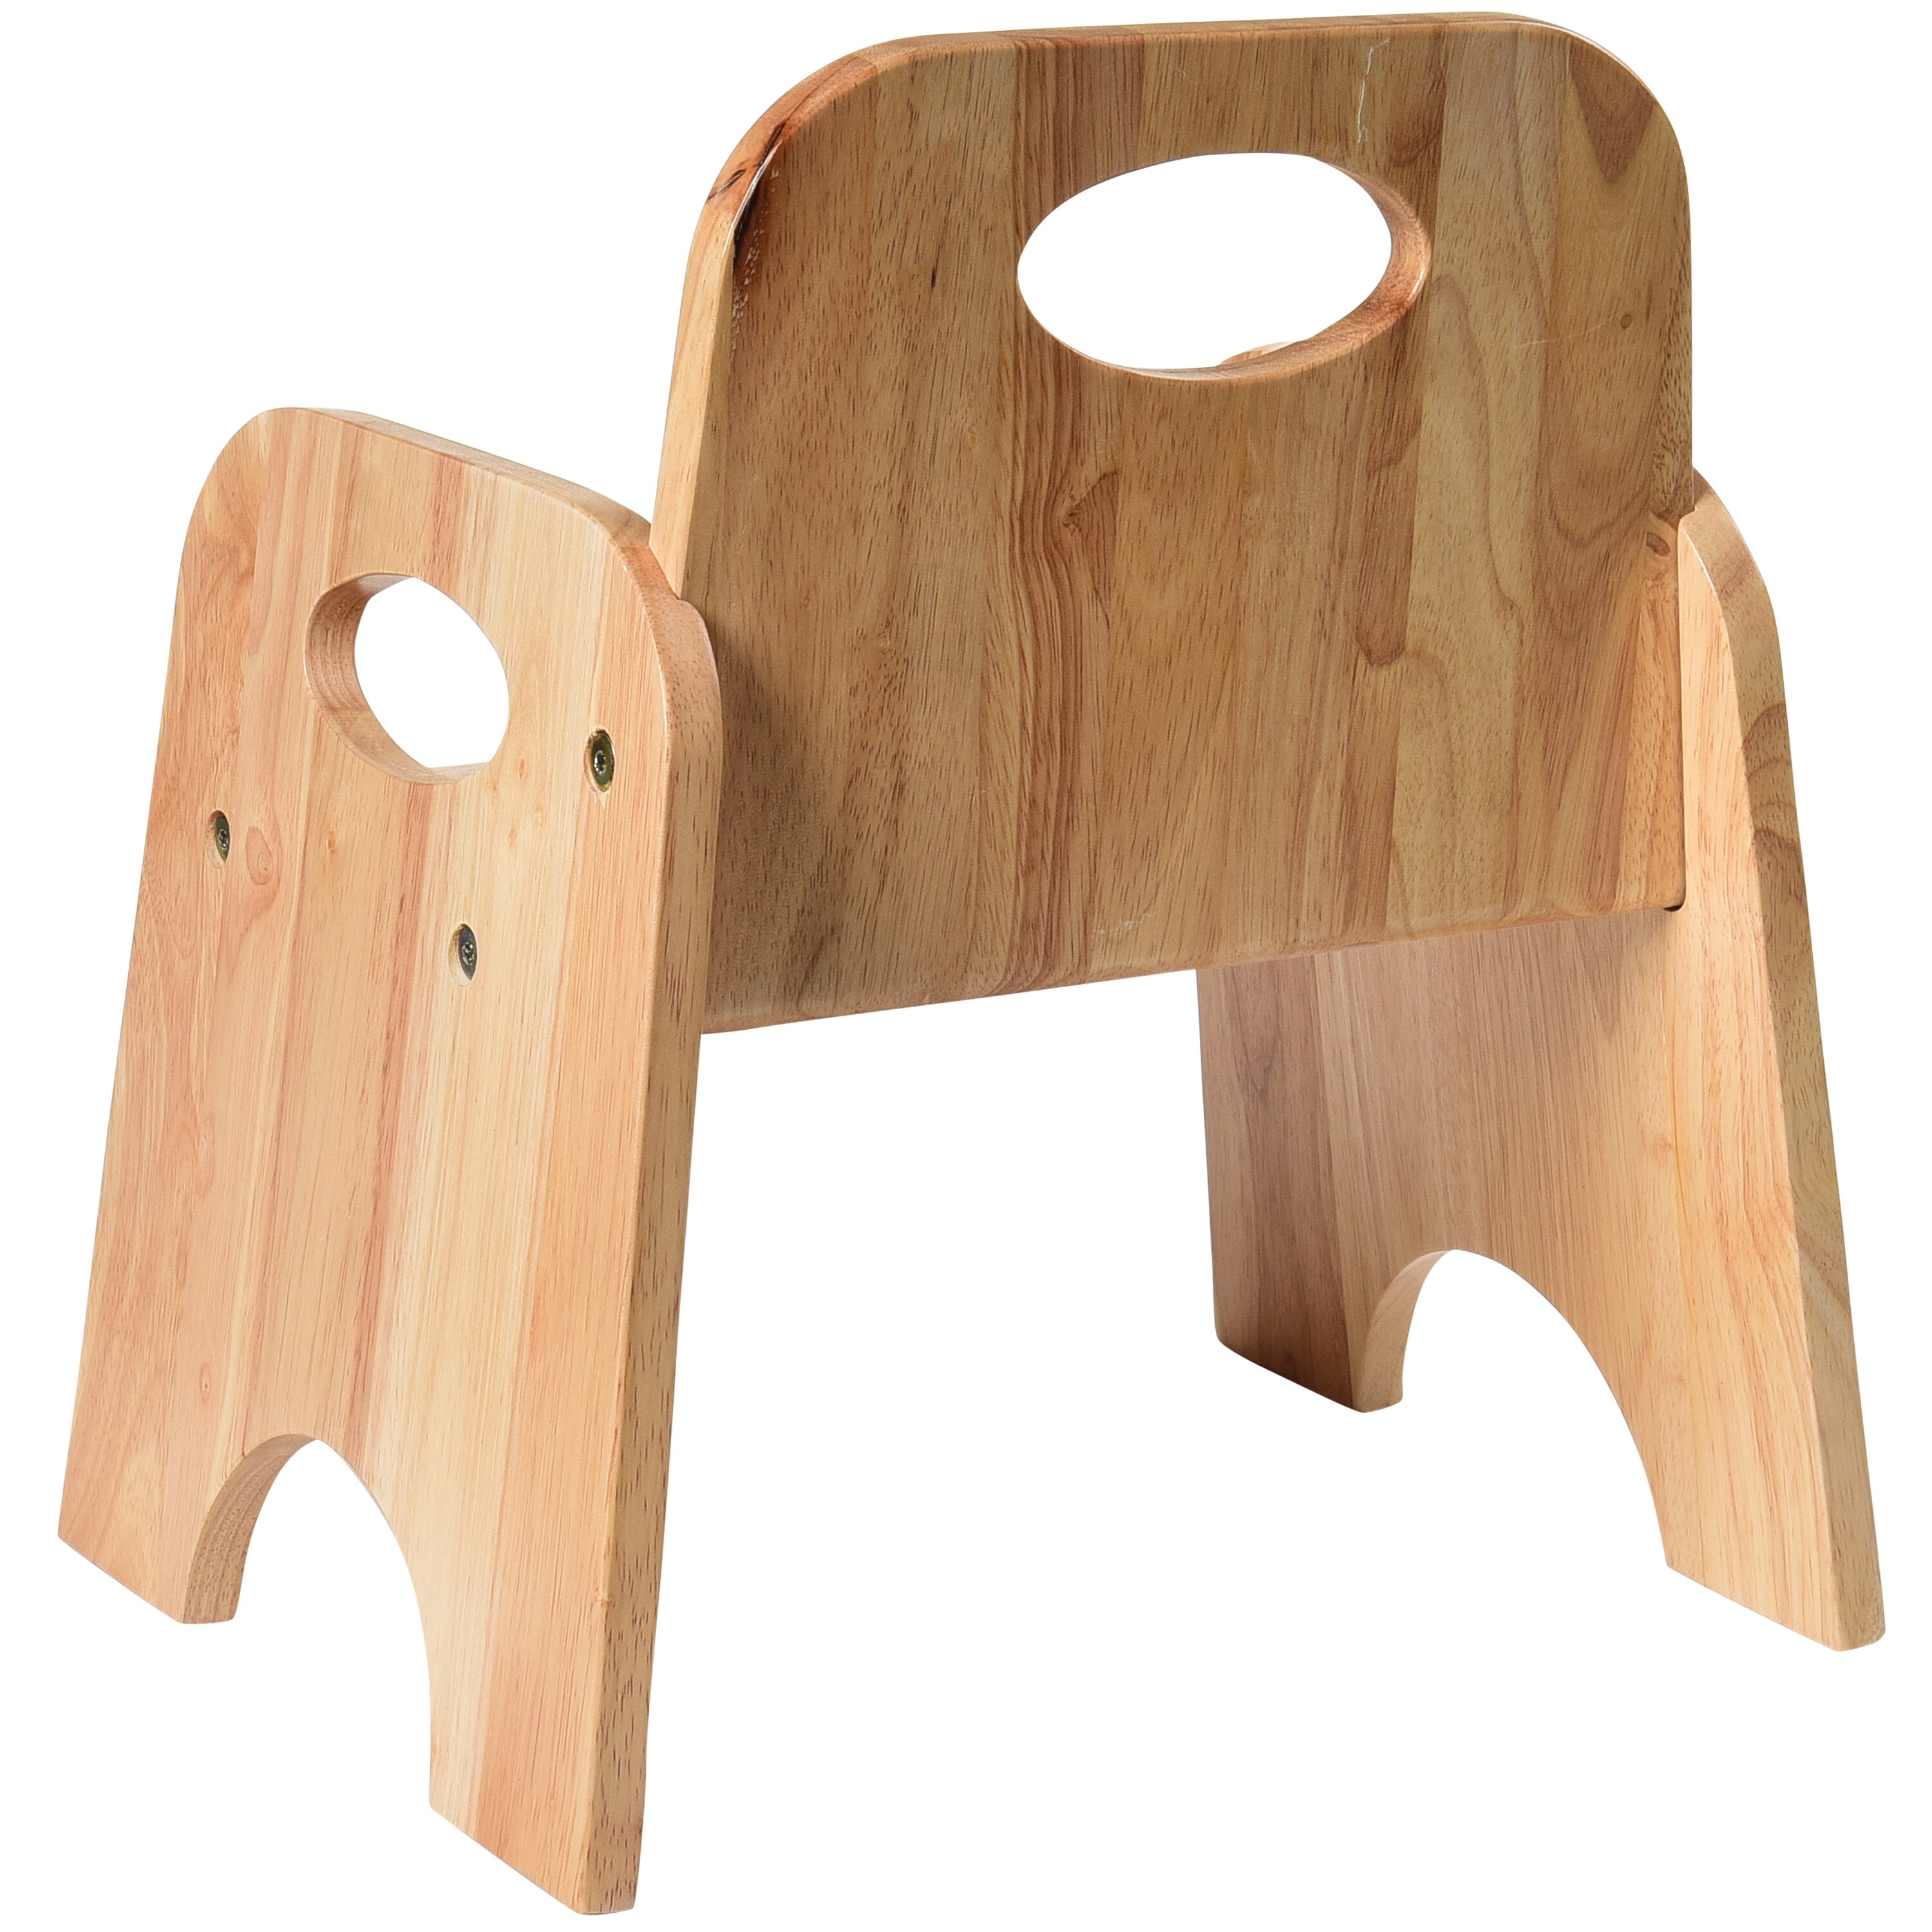 Classic Toddler Chair 8" High